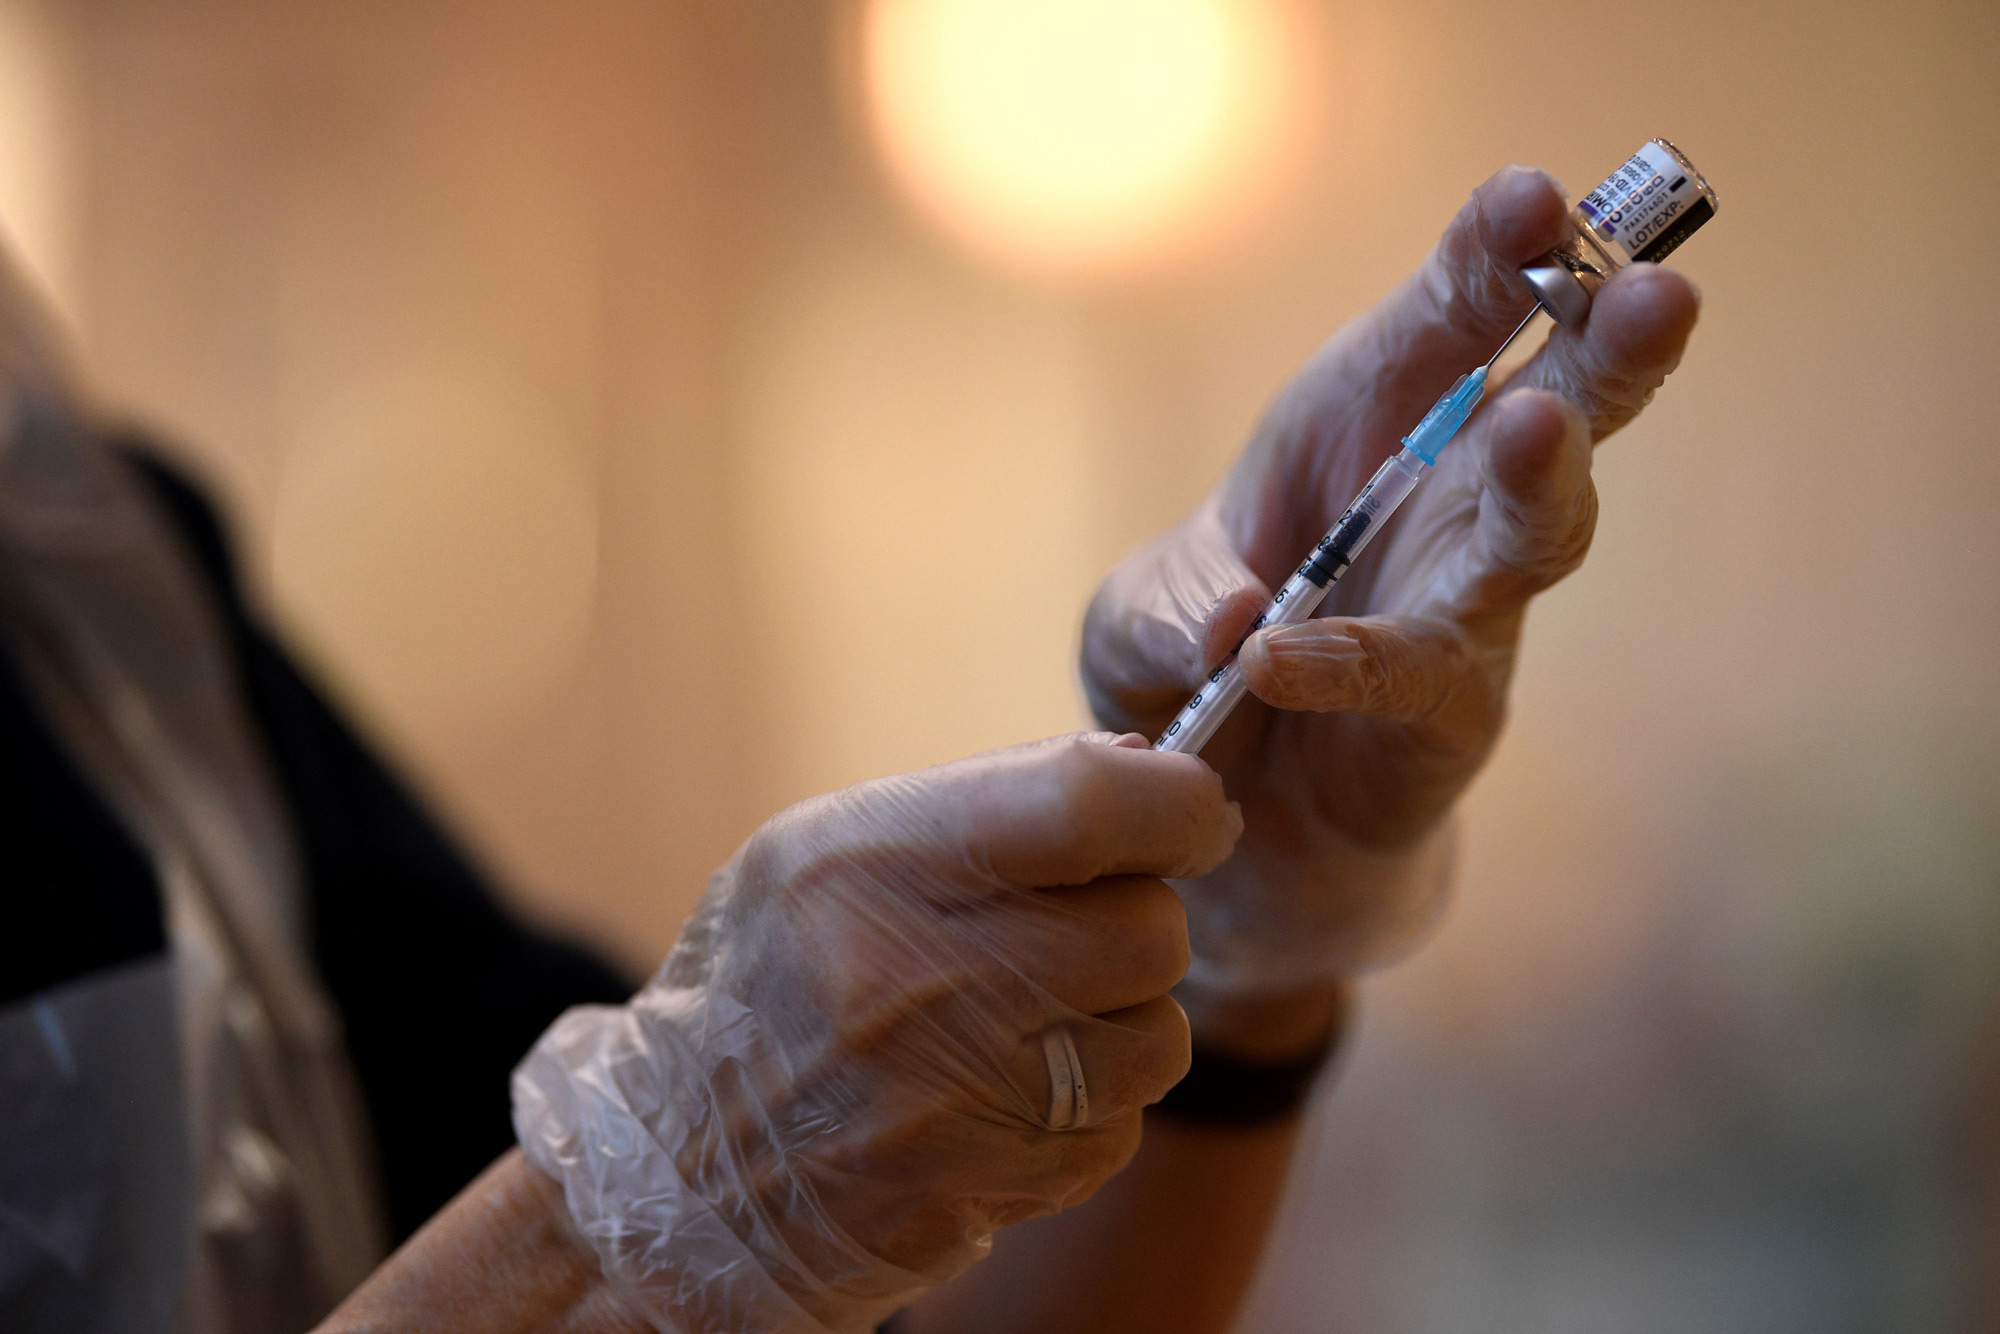 A booster dose of the Pfizer Covid-19 vaccine is drawn up in a vaccination clinic set up at St Columba's Church in Sheffield, England, on December 15.